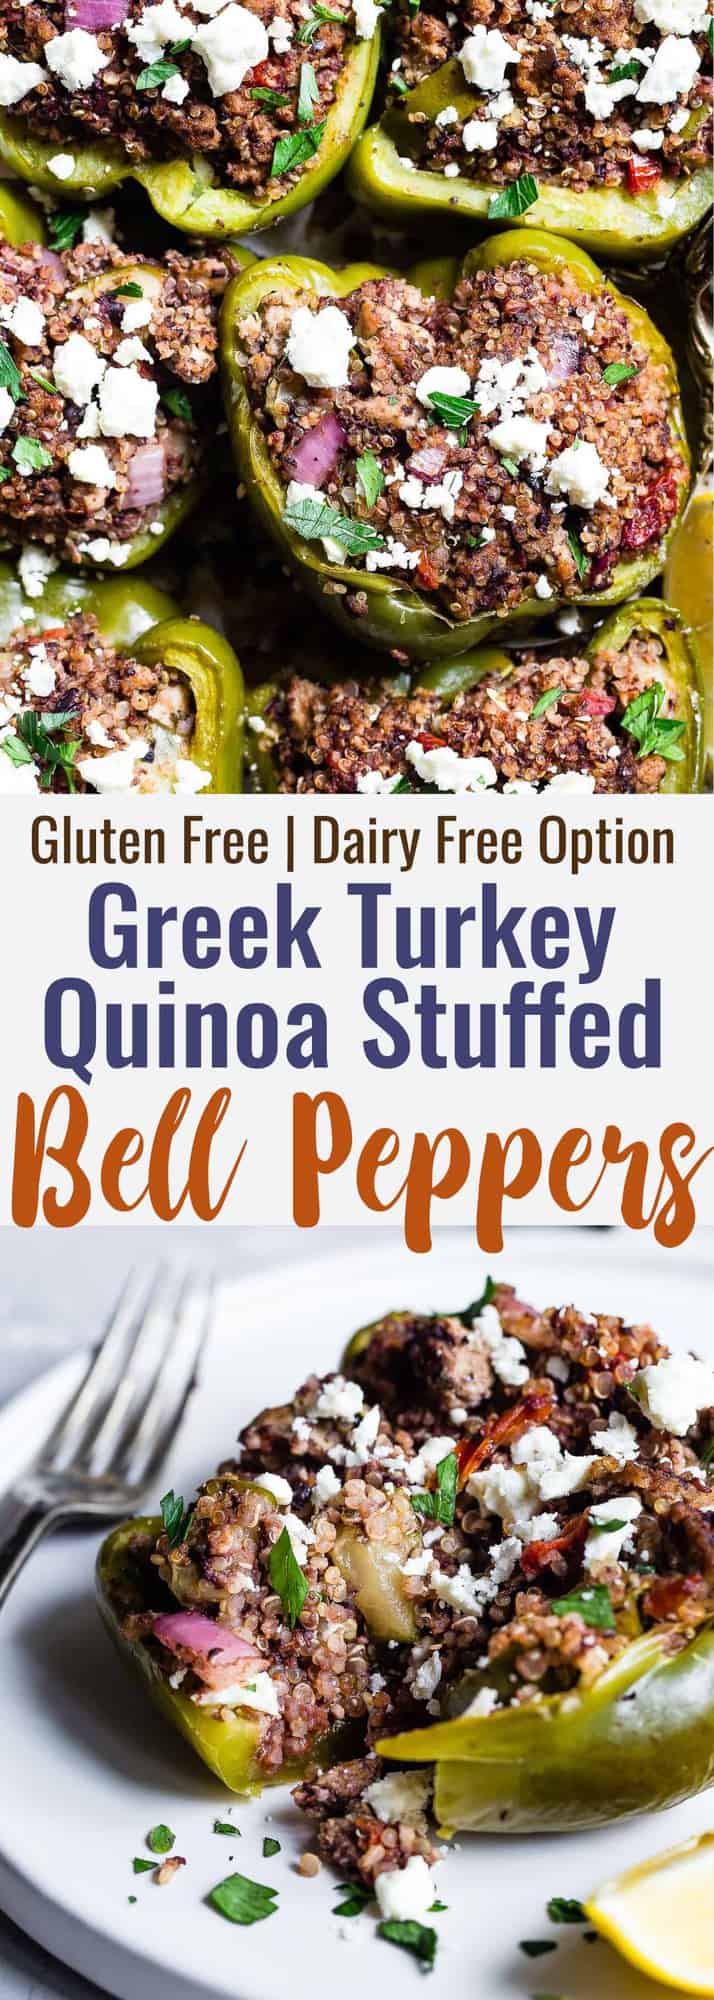 Greek Healthy Turkey Quinoa Stuffed Bell Peppers - These Turkey Quinoa Stuffed Bell Peppers are an easy, crowd-pleasing, weeknight dinner packed with Greek flavors! Healthy, gluten free, dairy free and SO delicious! | #Foodfaithfitness | #Glutenfree #Healthy #Quinoa #Dairyfree #Dinner